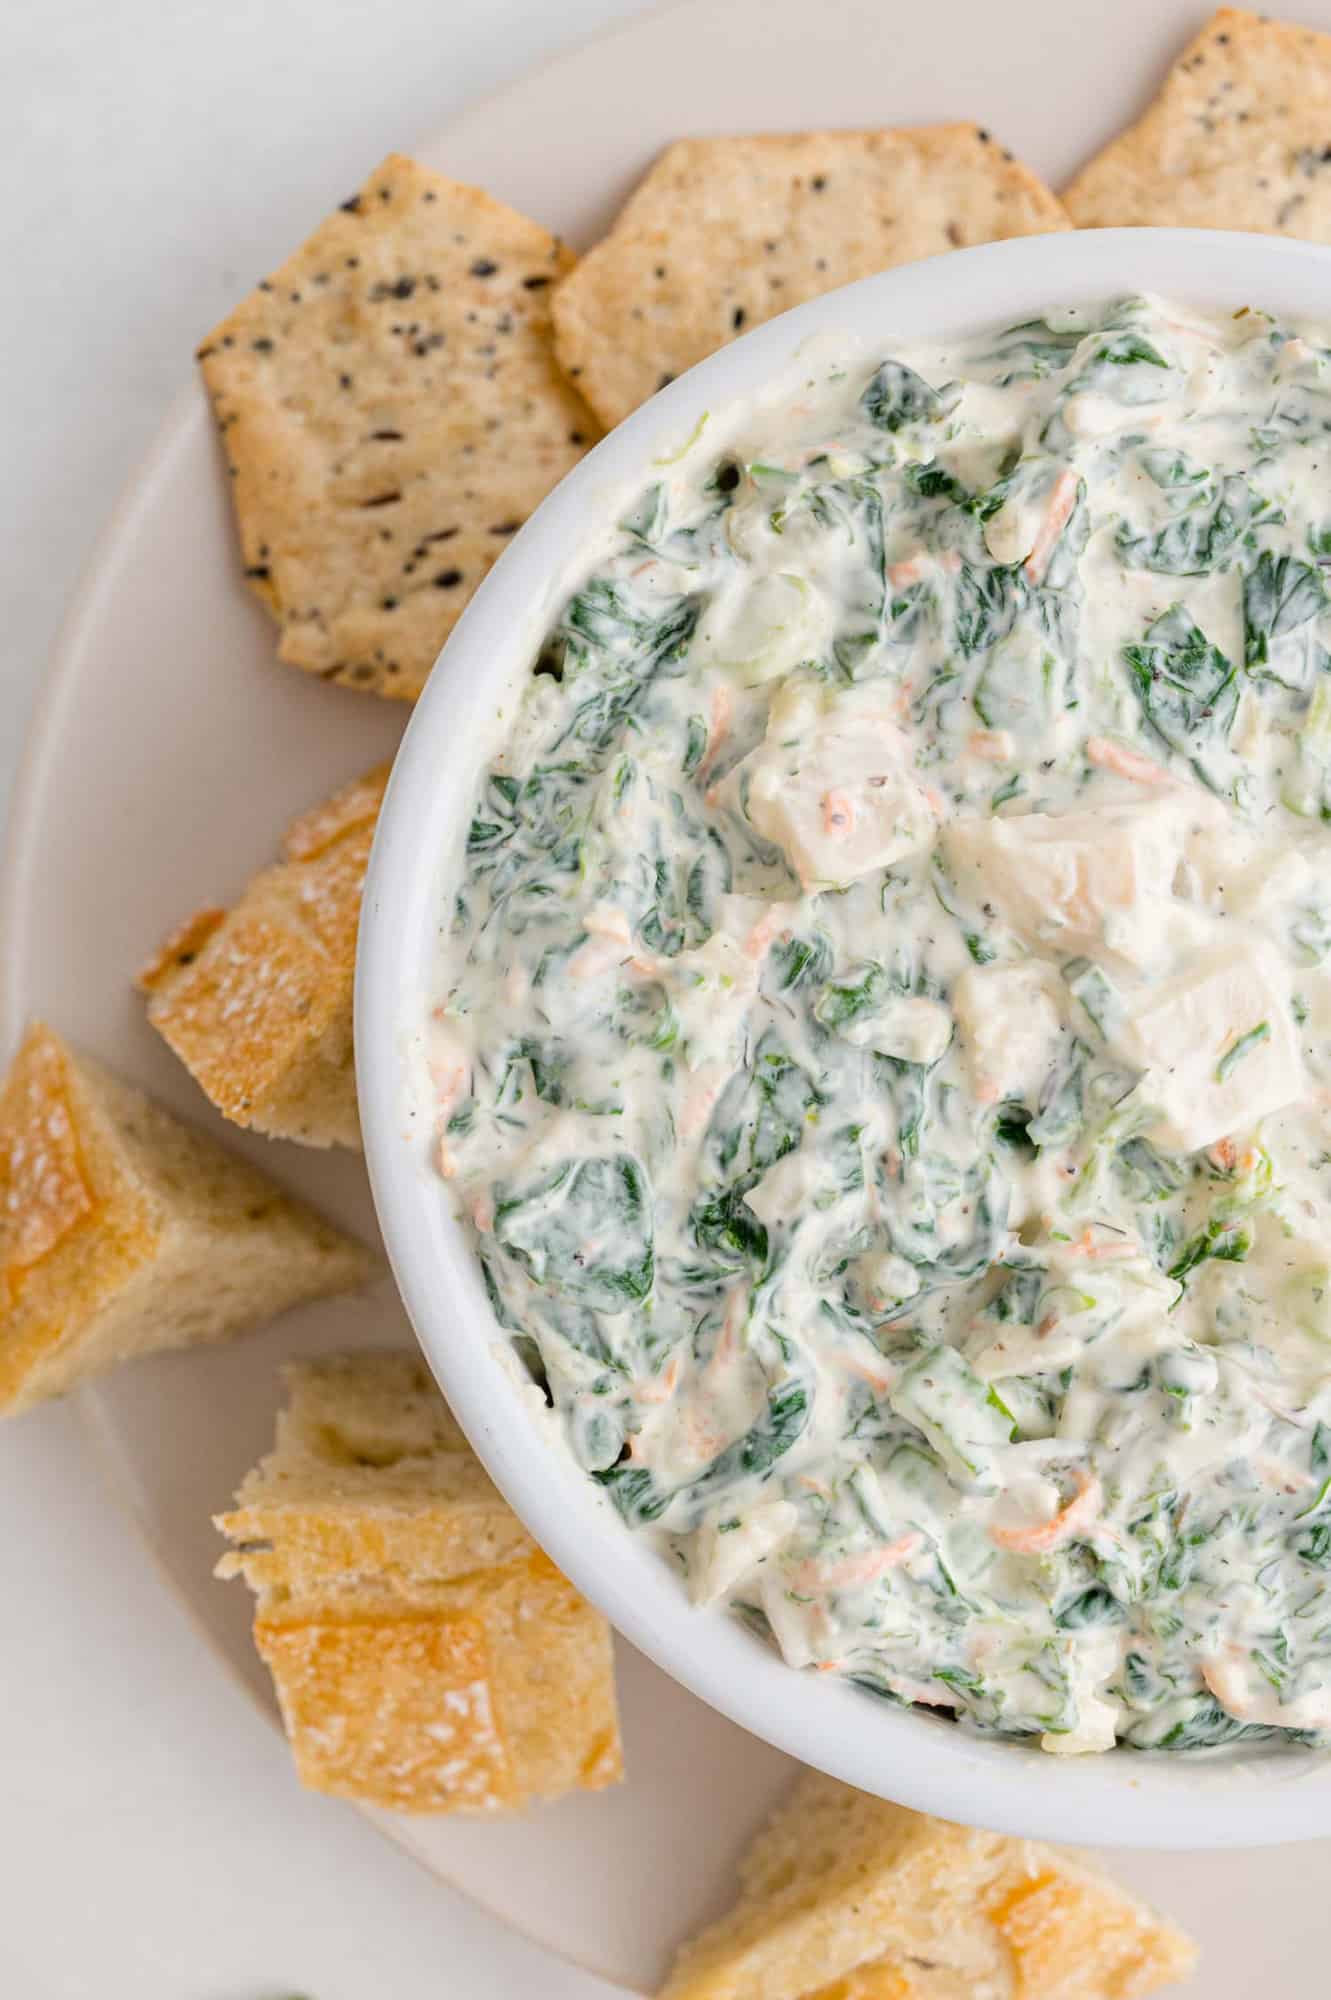 Spinach Dip (from scratch or with seasoning mix) Recipe - Rachel Cooks®